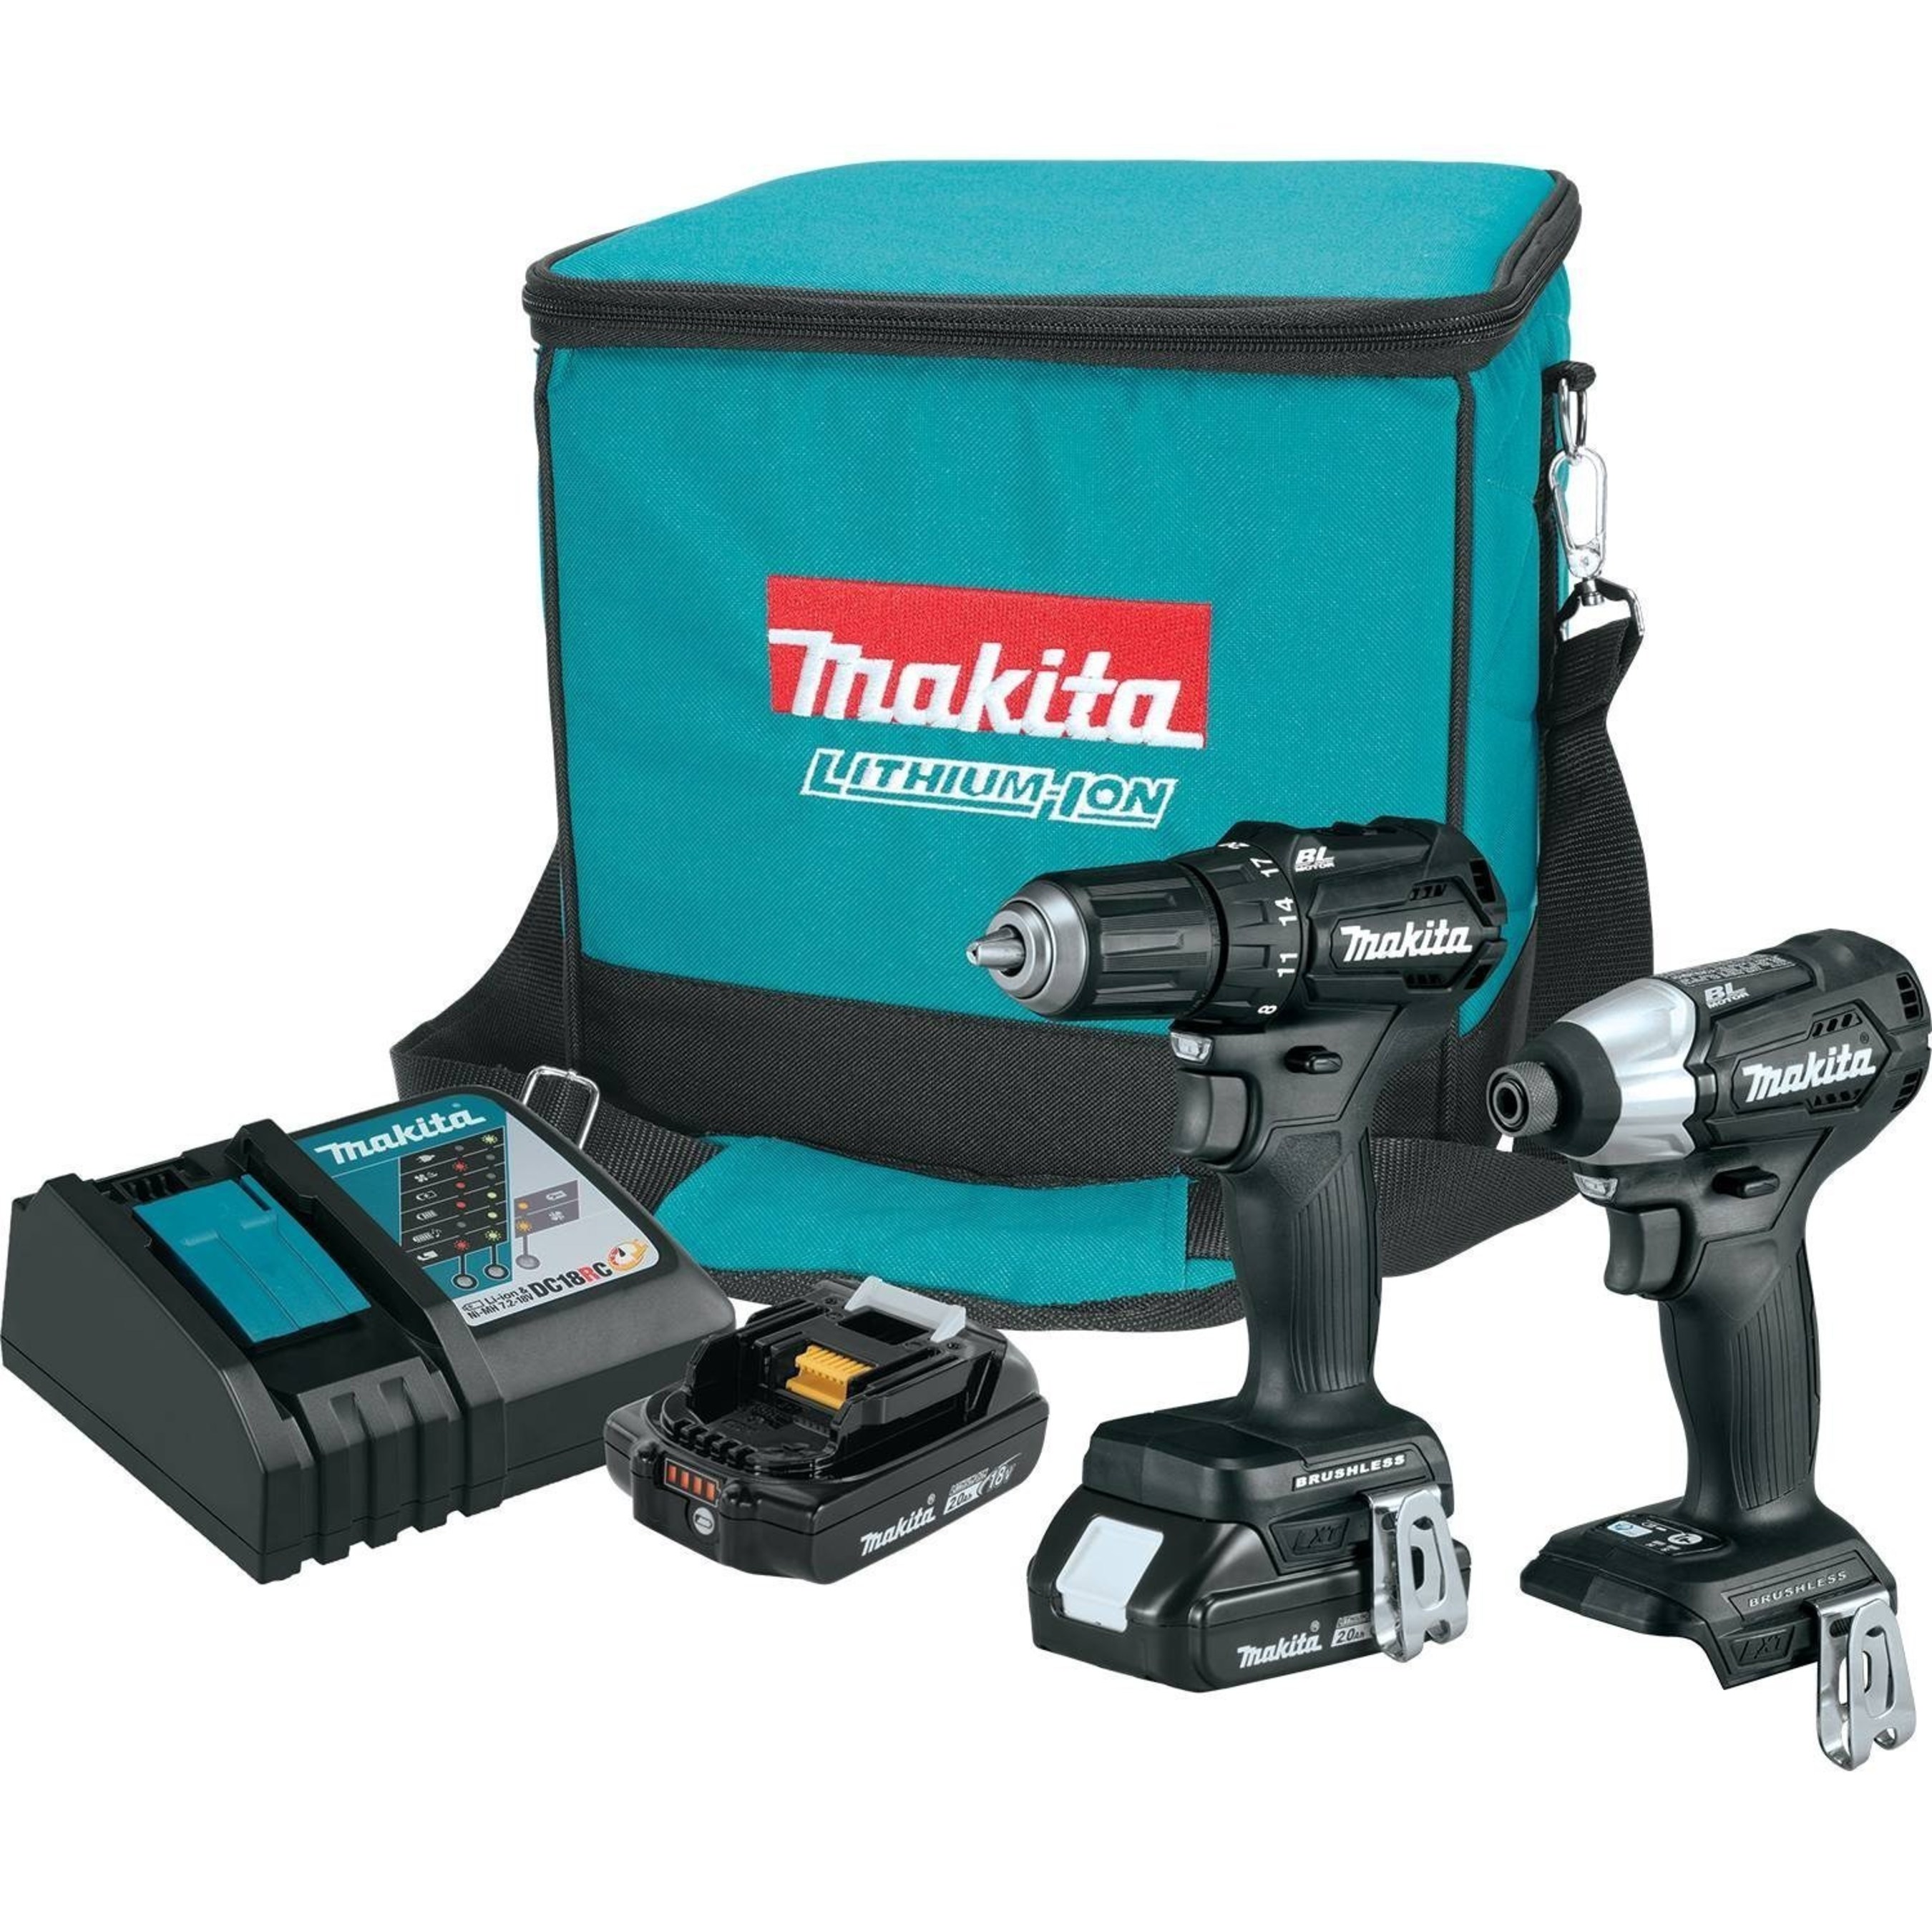 Makita 18V LXT Sub-Compact Brushless tools, a new class in cordless, are the most compact and lightest weight in the 18-volt category.